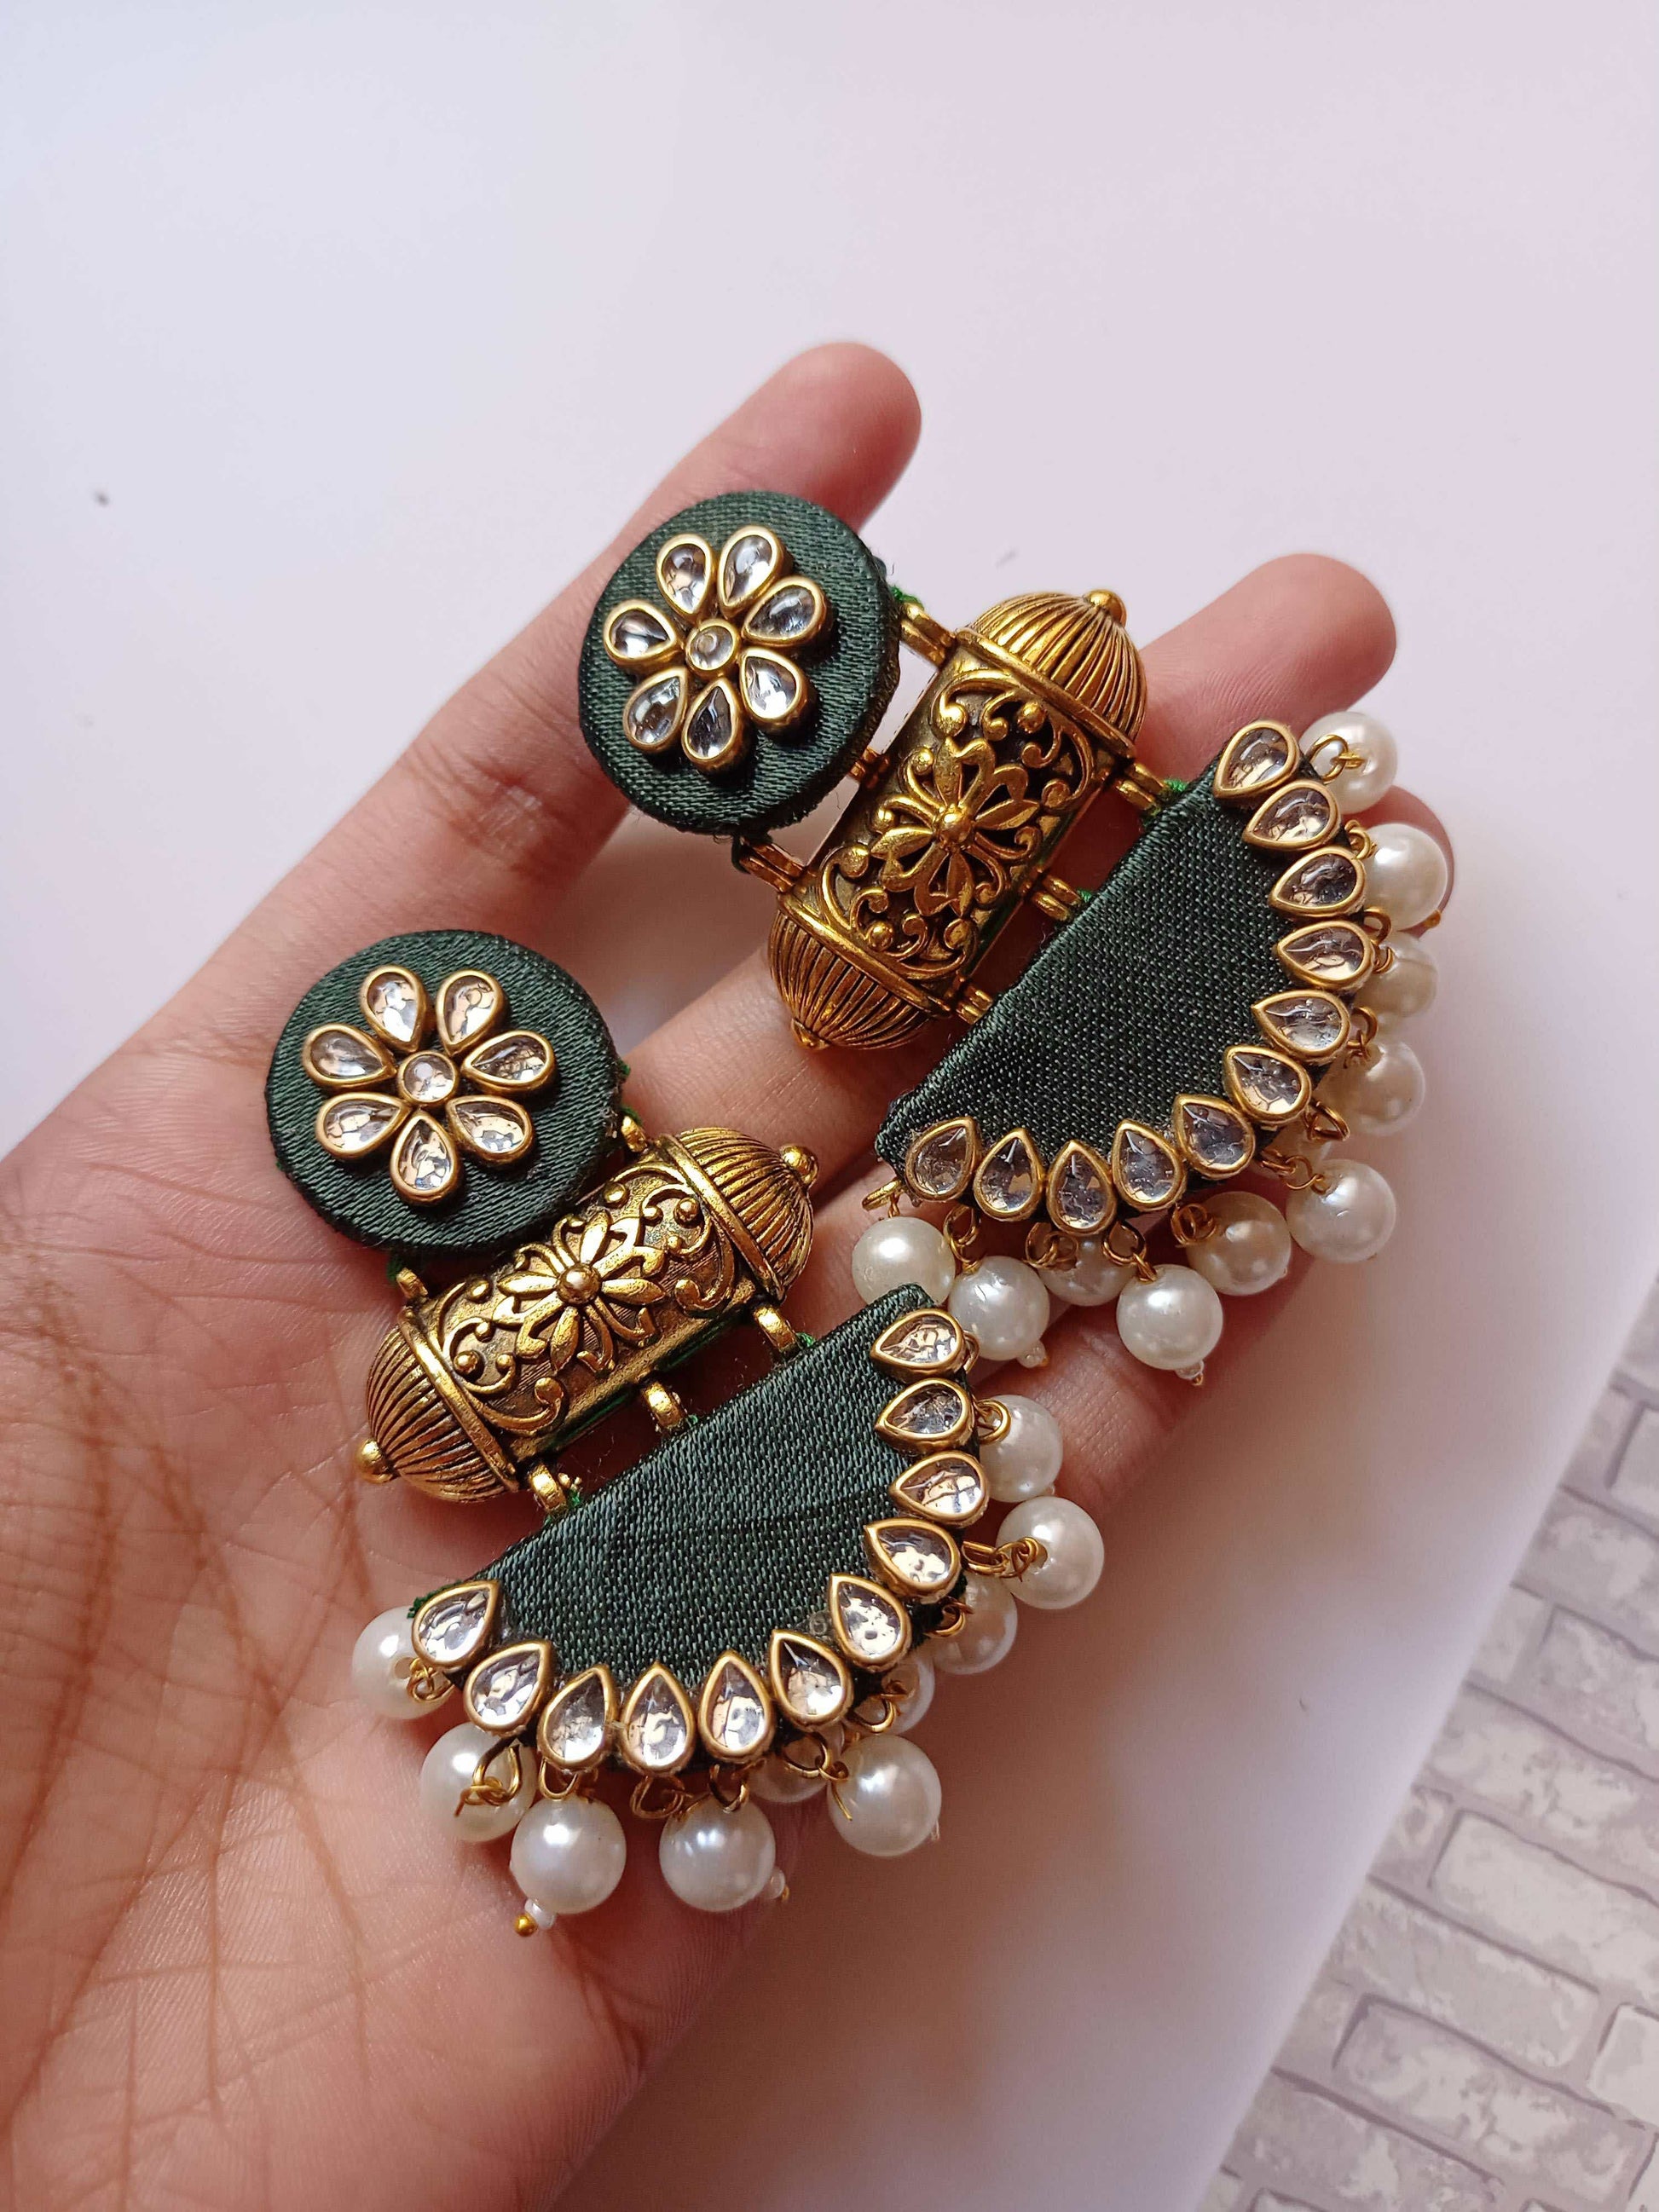 Palm holding Bottle green earrings with golden kundan and pearls work on white grey backdrop